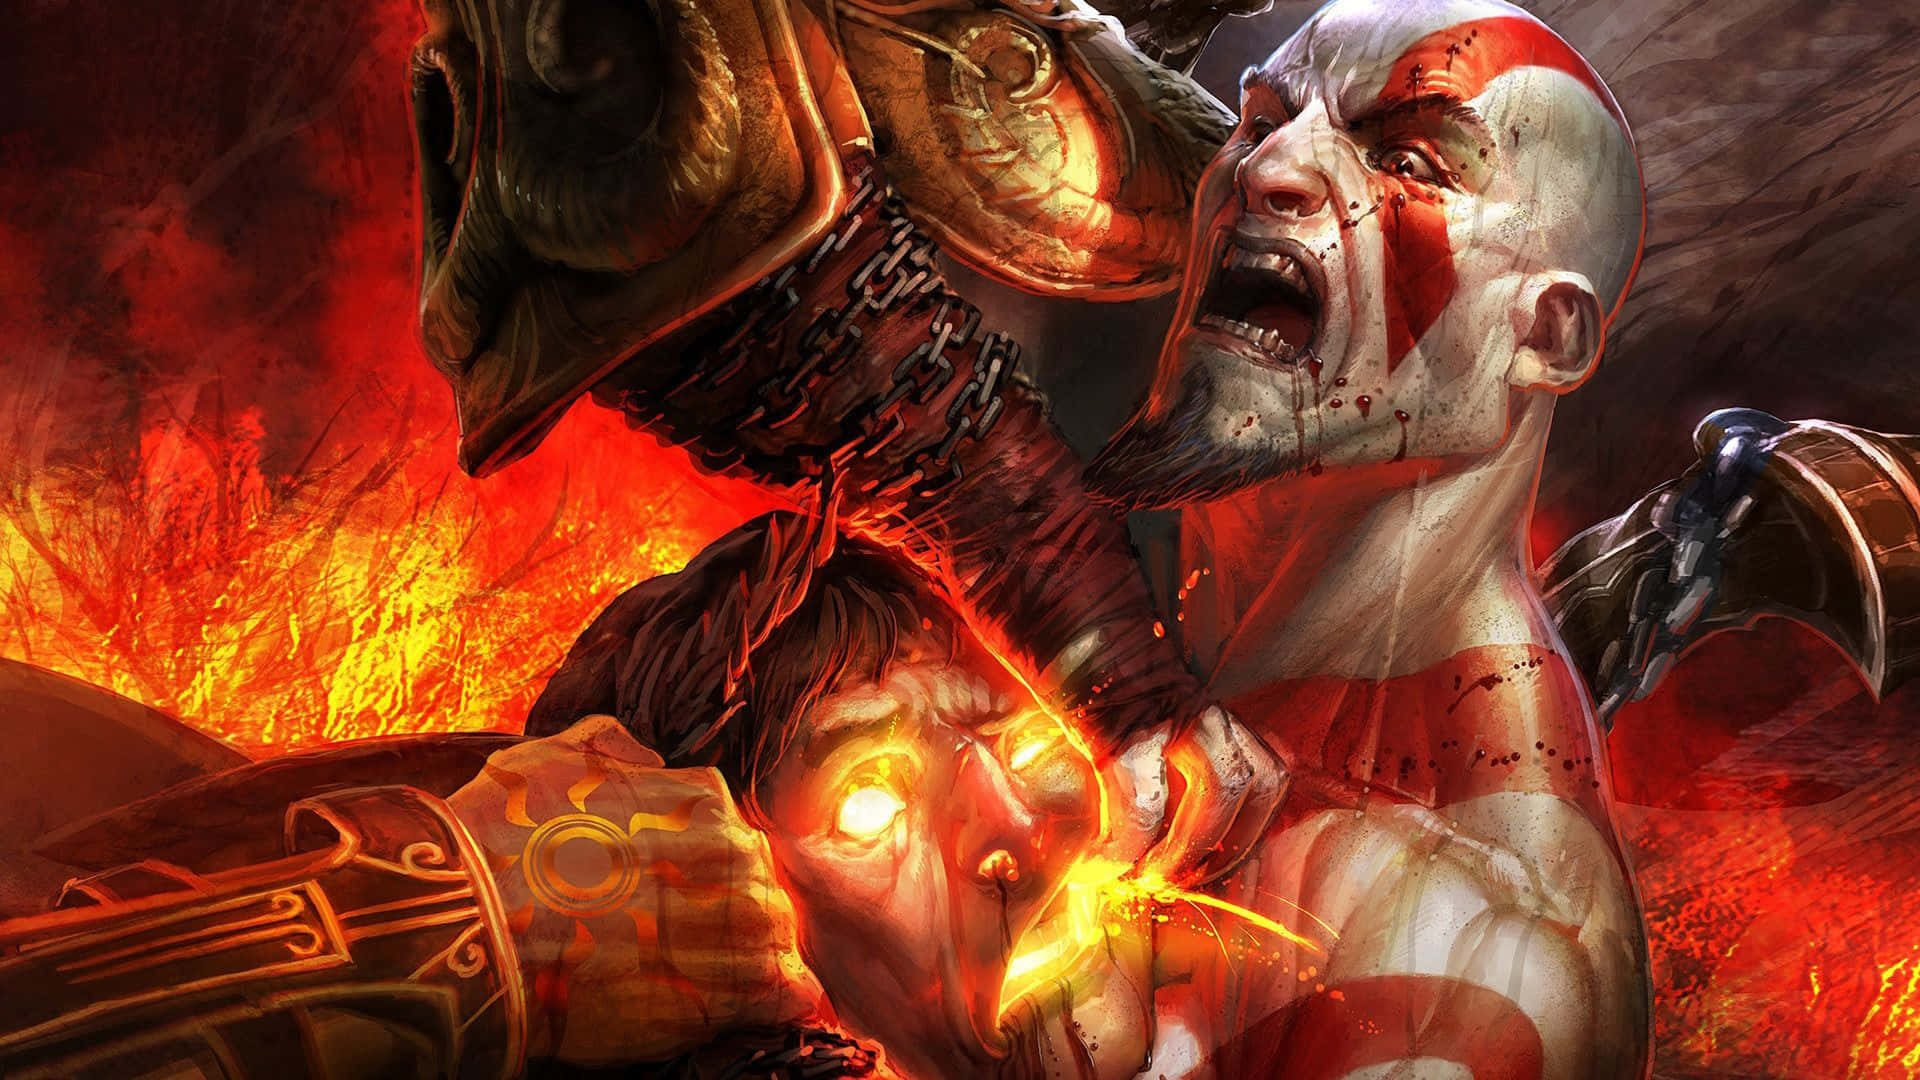 Kratos Unleashes His Wrath Into The Heavens Wallpaper